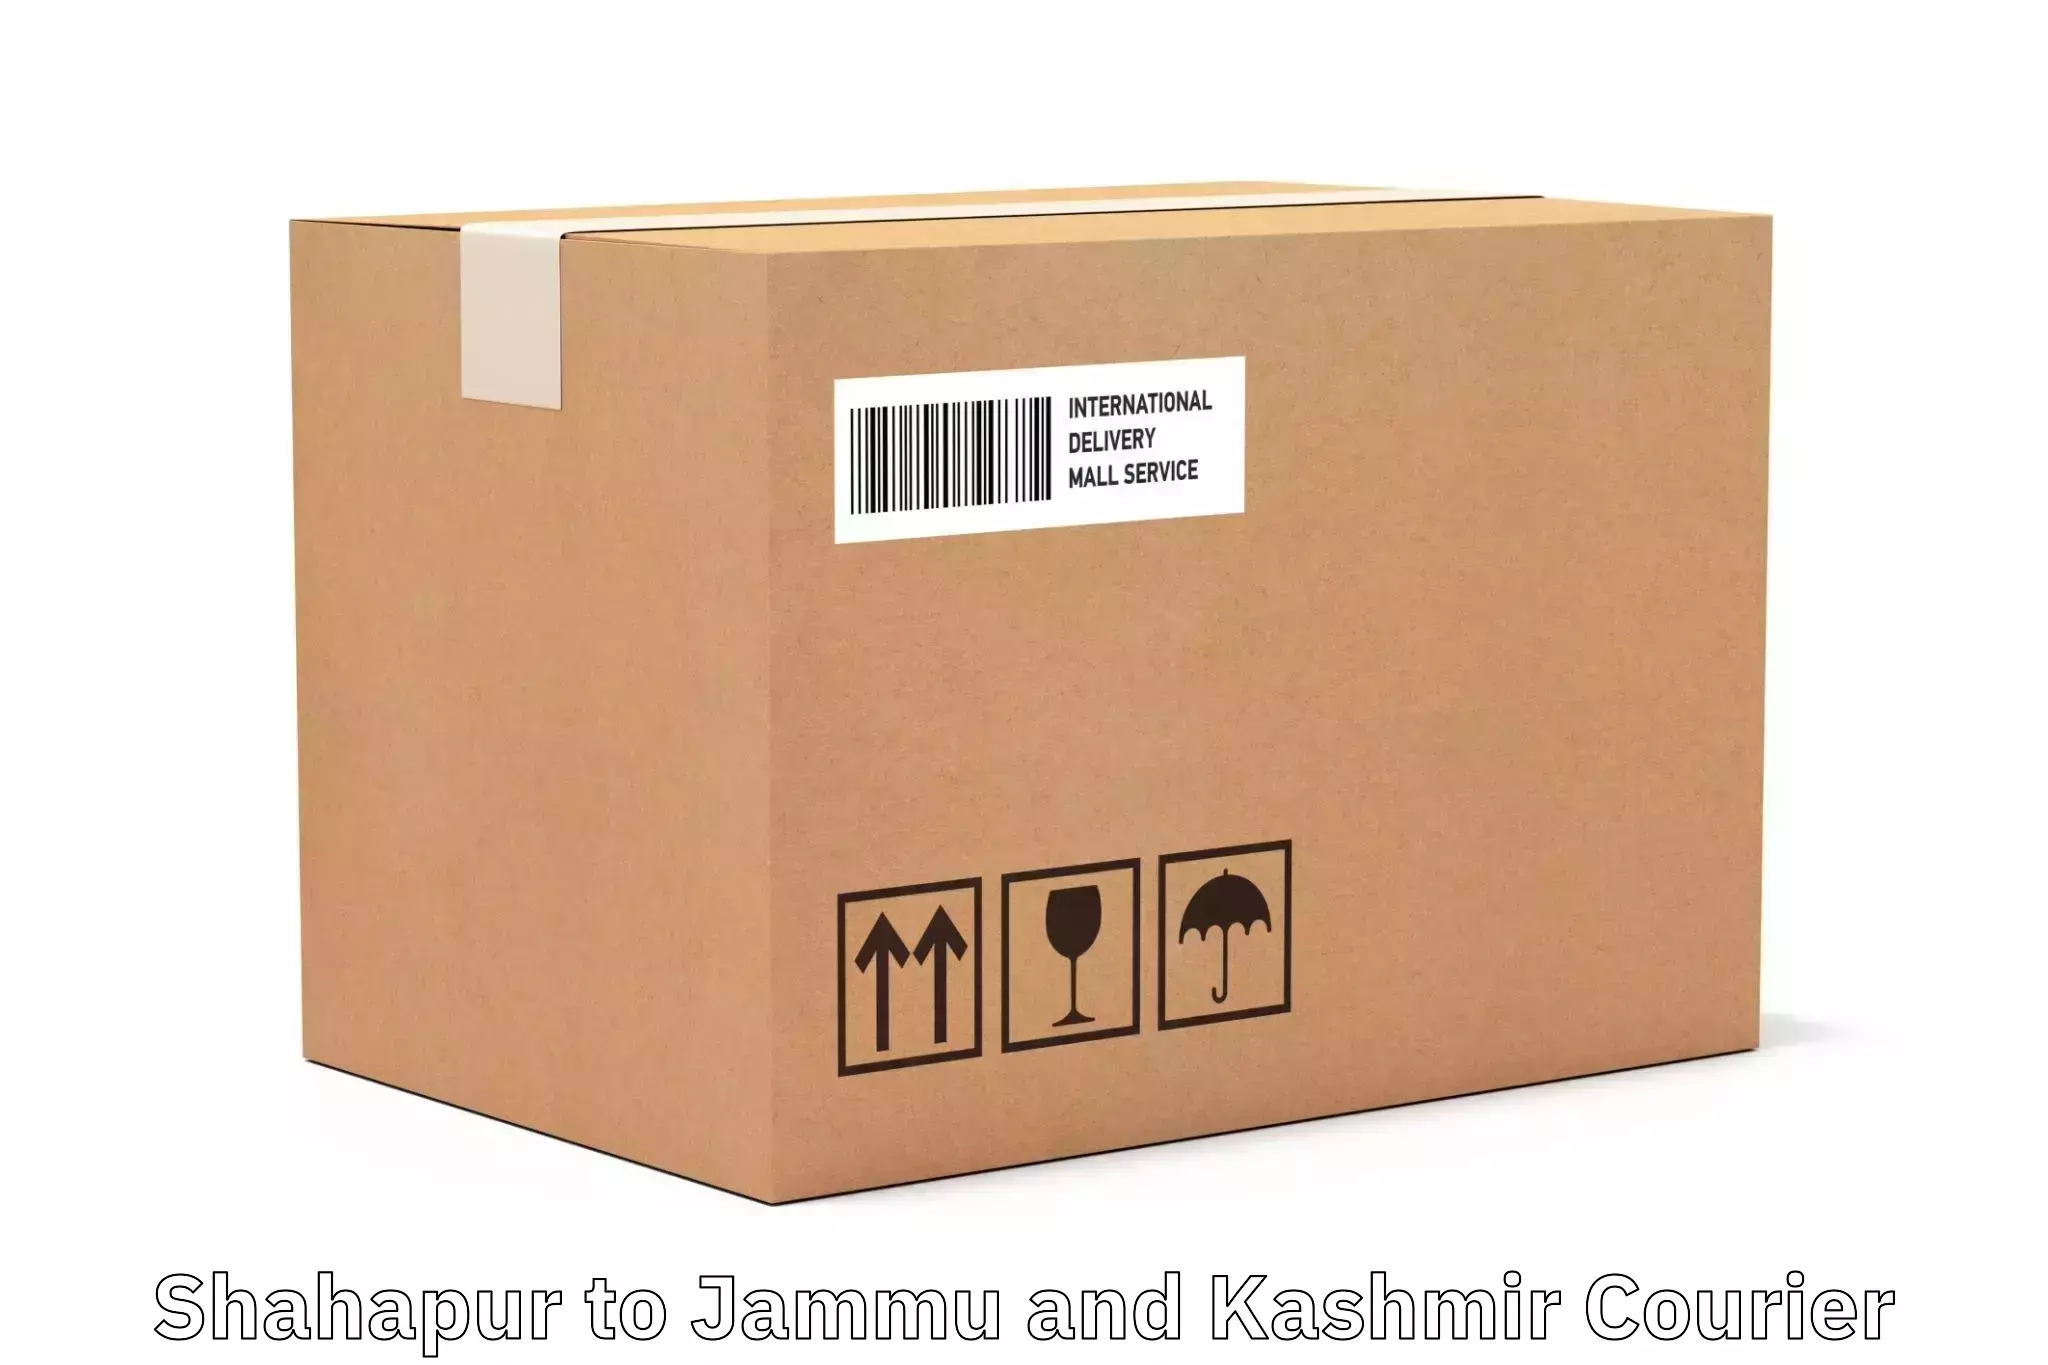 Affordable parcel service Shahapur to Leh